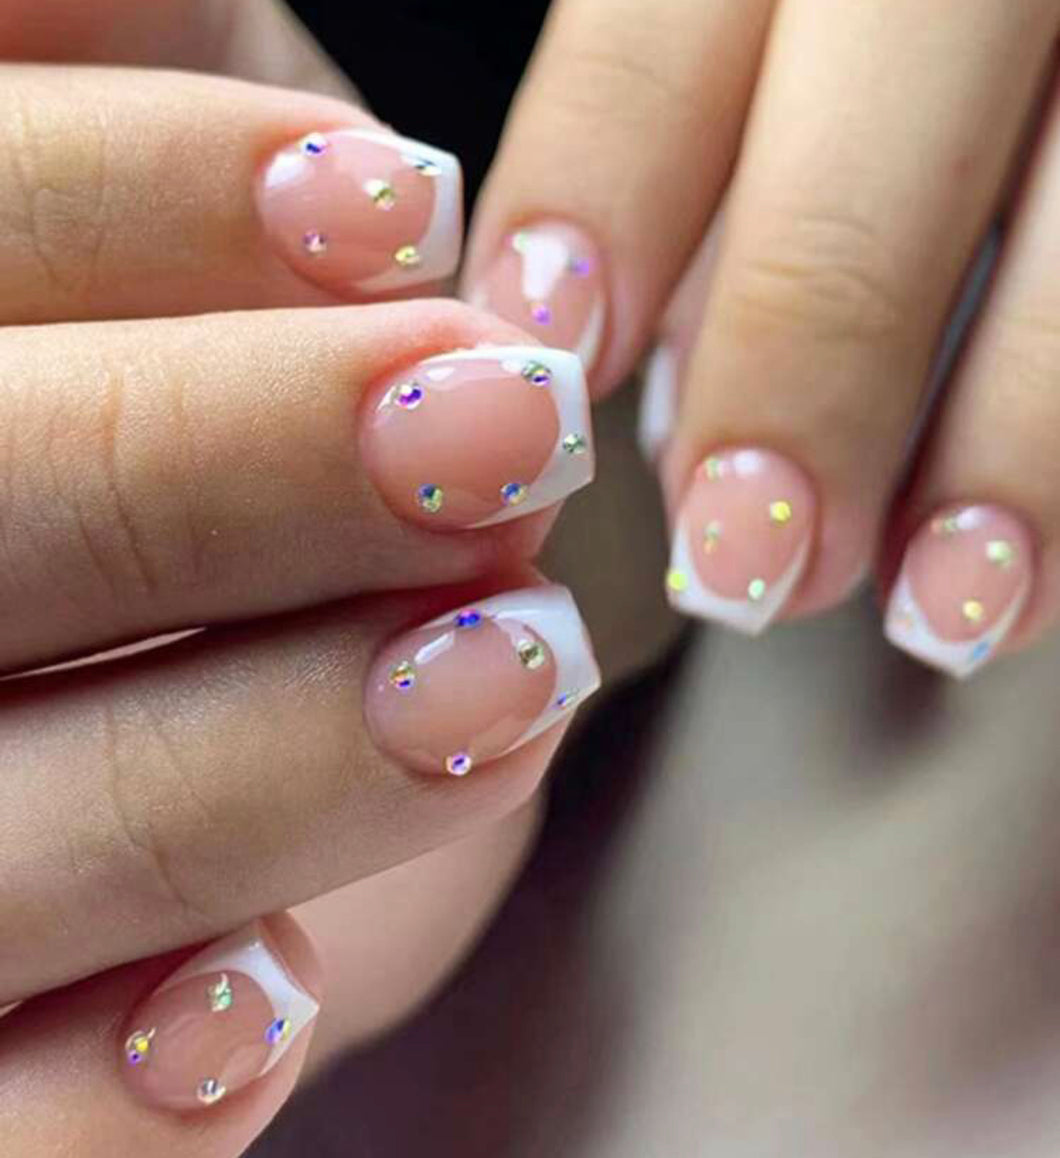 Active French Bling | Active Length French Nails w/ Rhinestones